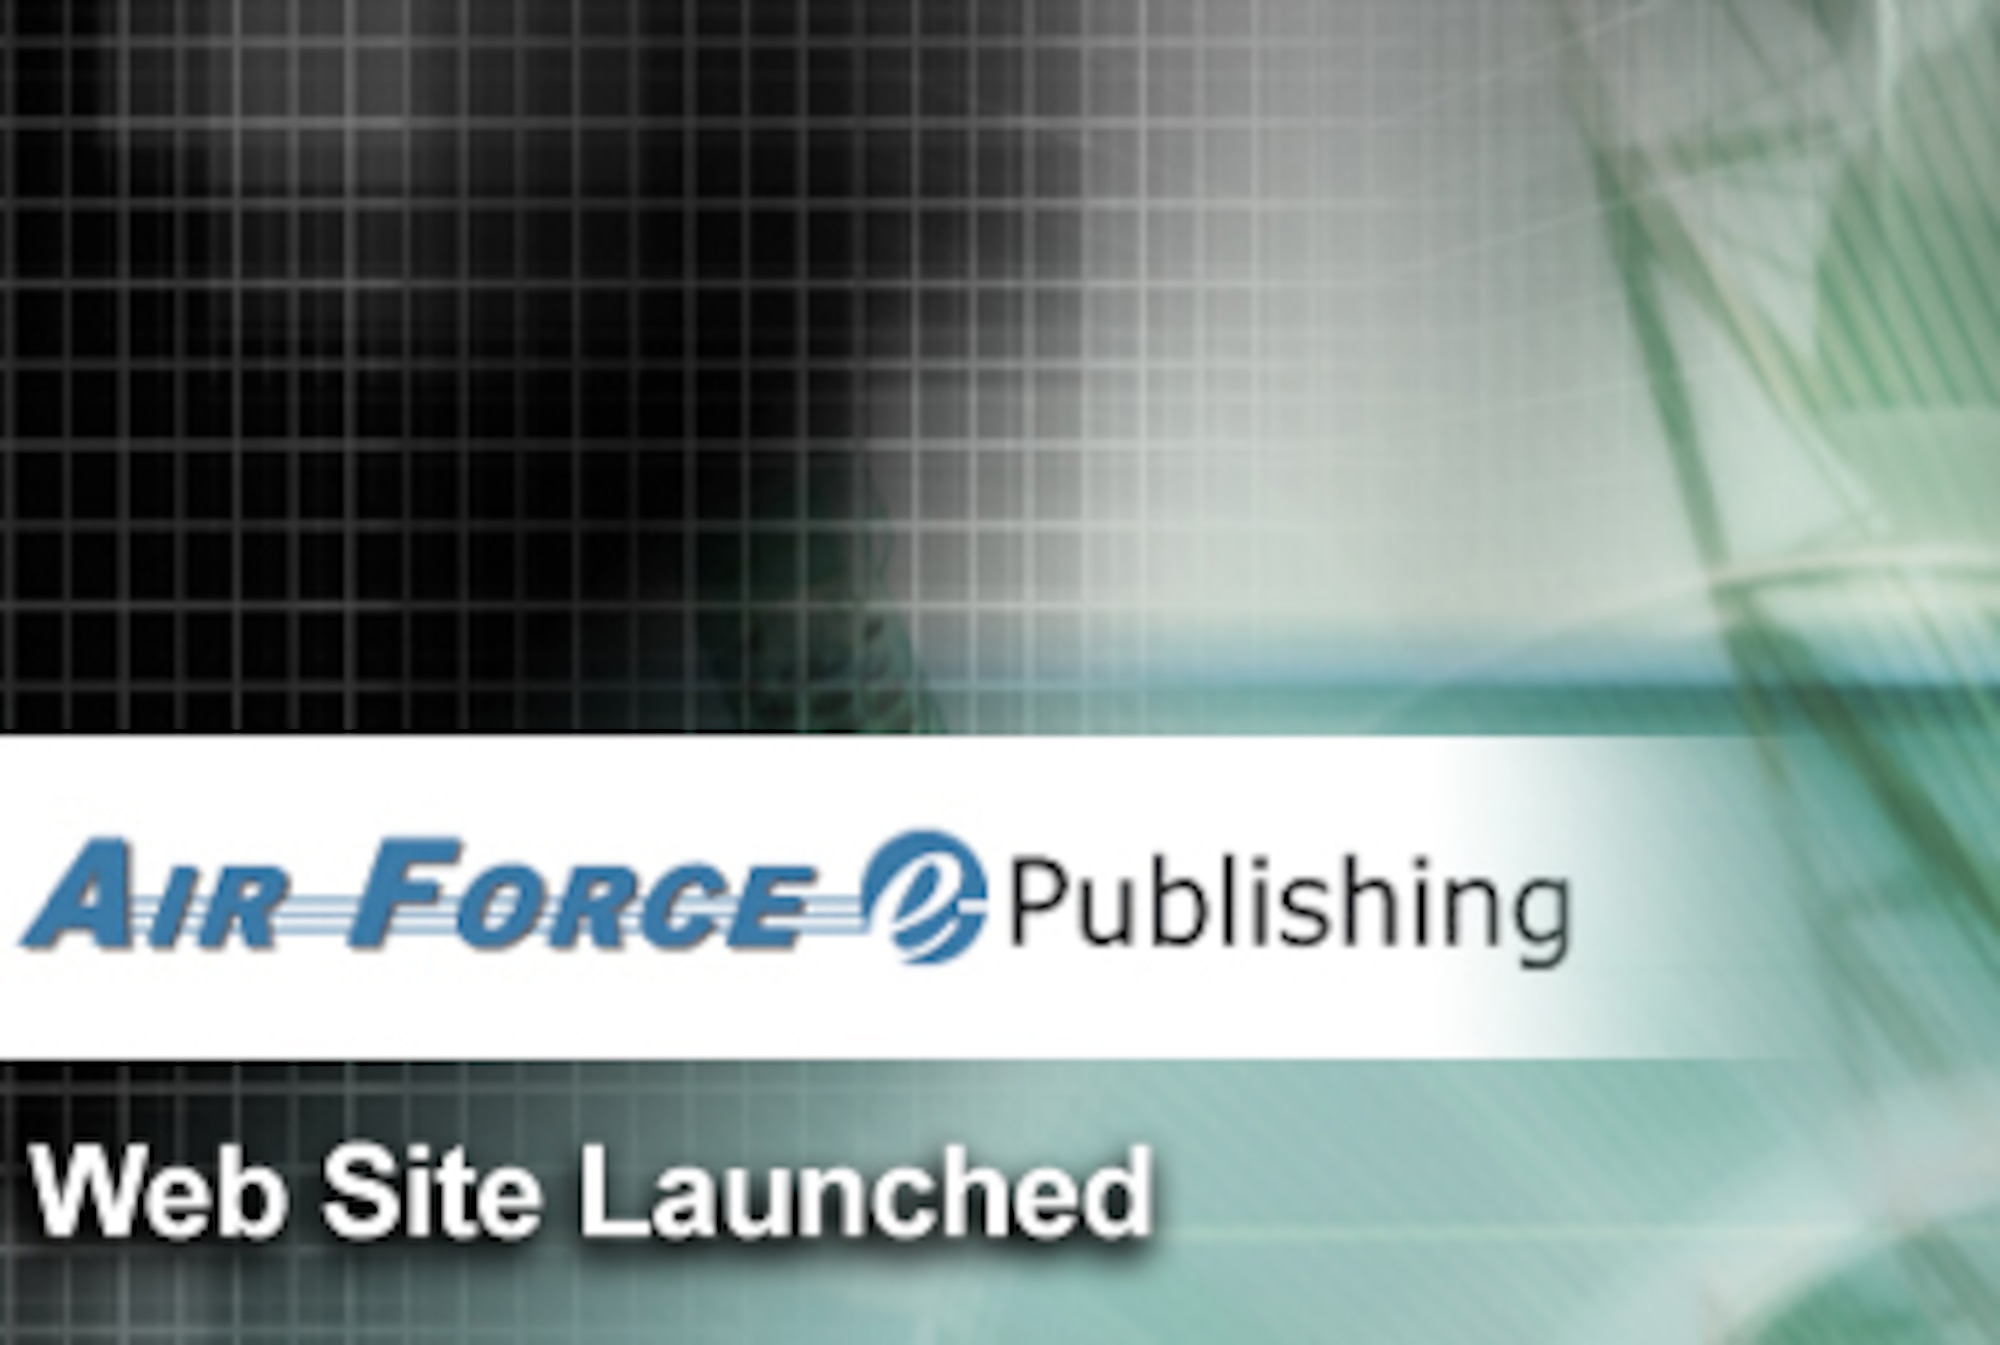 The Air Force Departmental Publishing Office, or e-Pubs, officially migrated under the Air Force Public Web program Aug. 24 and is now accessible at http://www.e-publishing.af.mil. A link to the new e-Pubs Web site is also available for customers on Air Force Link. (U.S. Air Force graphic/Mike Carabajal)